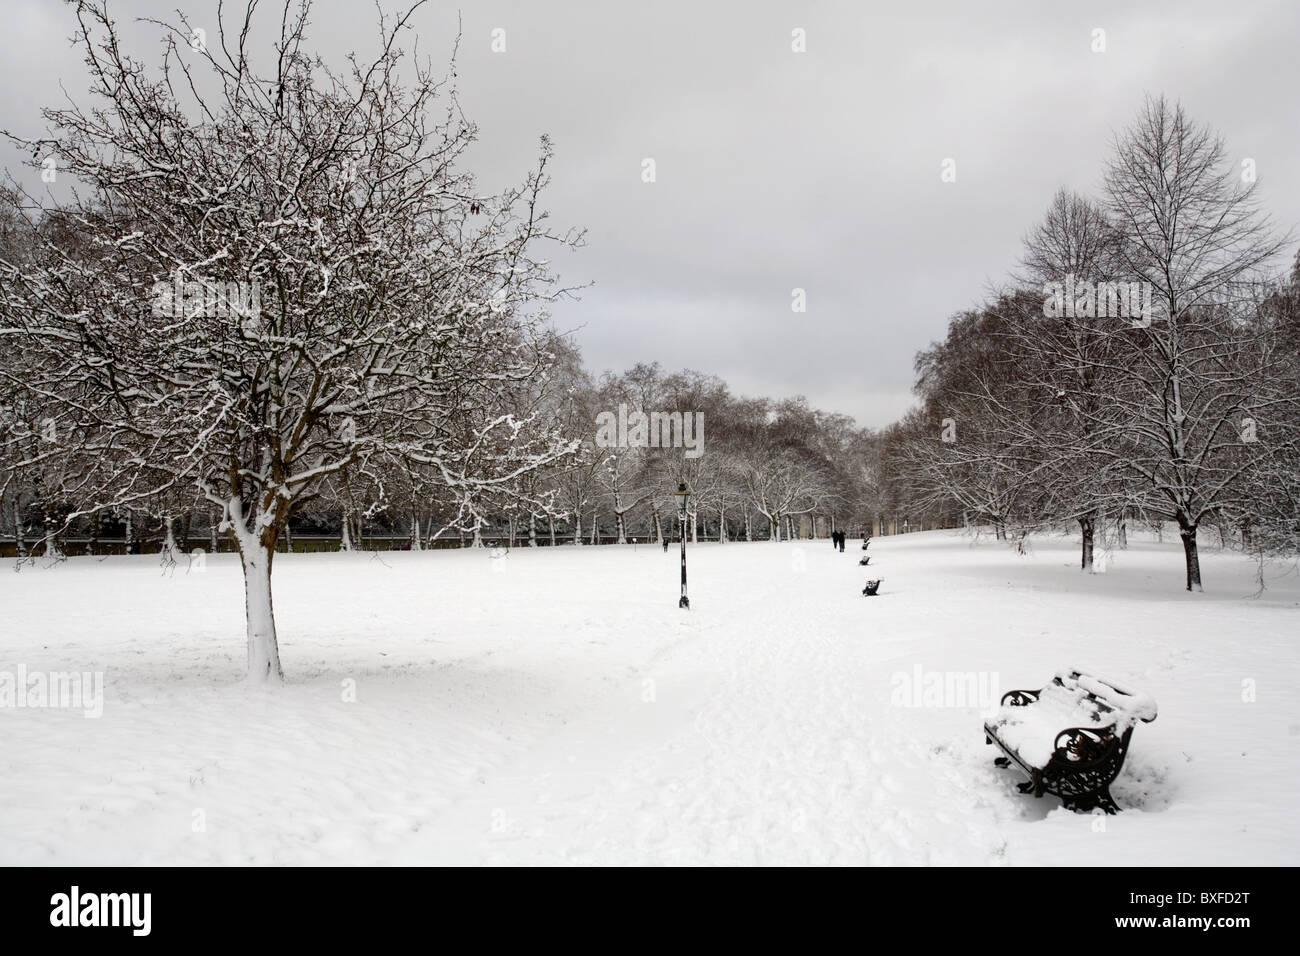 Green Park covered in white snow, London, England, Britain, UK Stock Photo